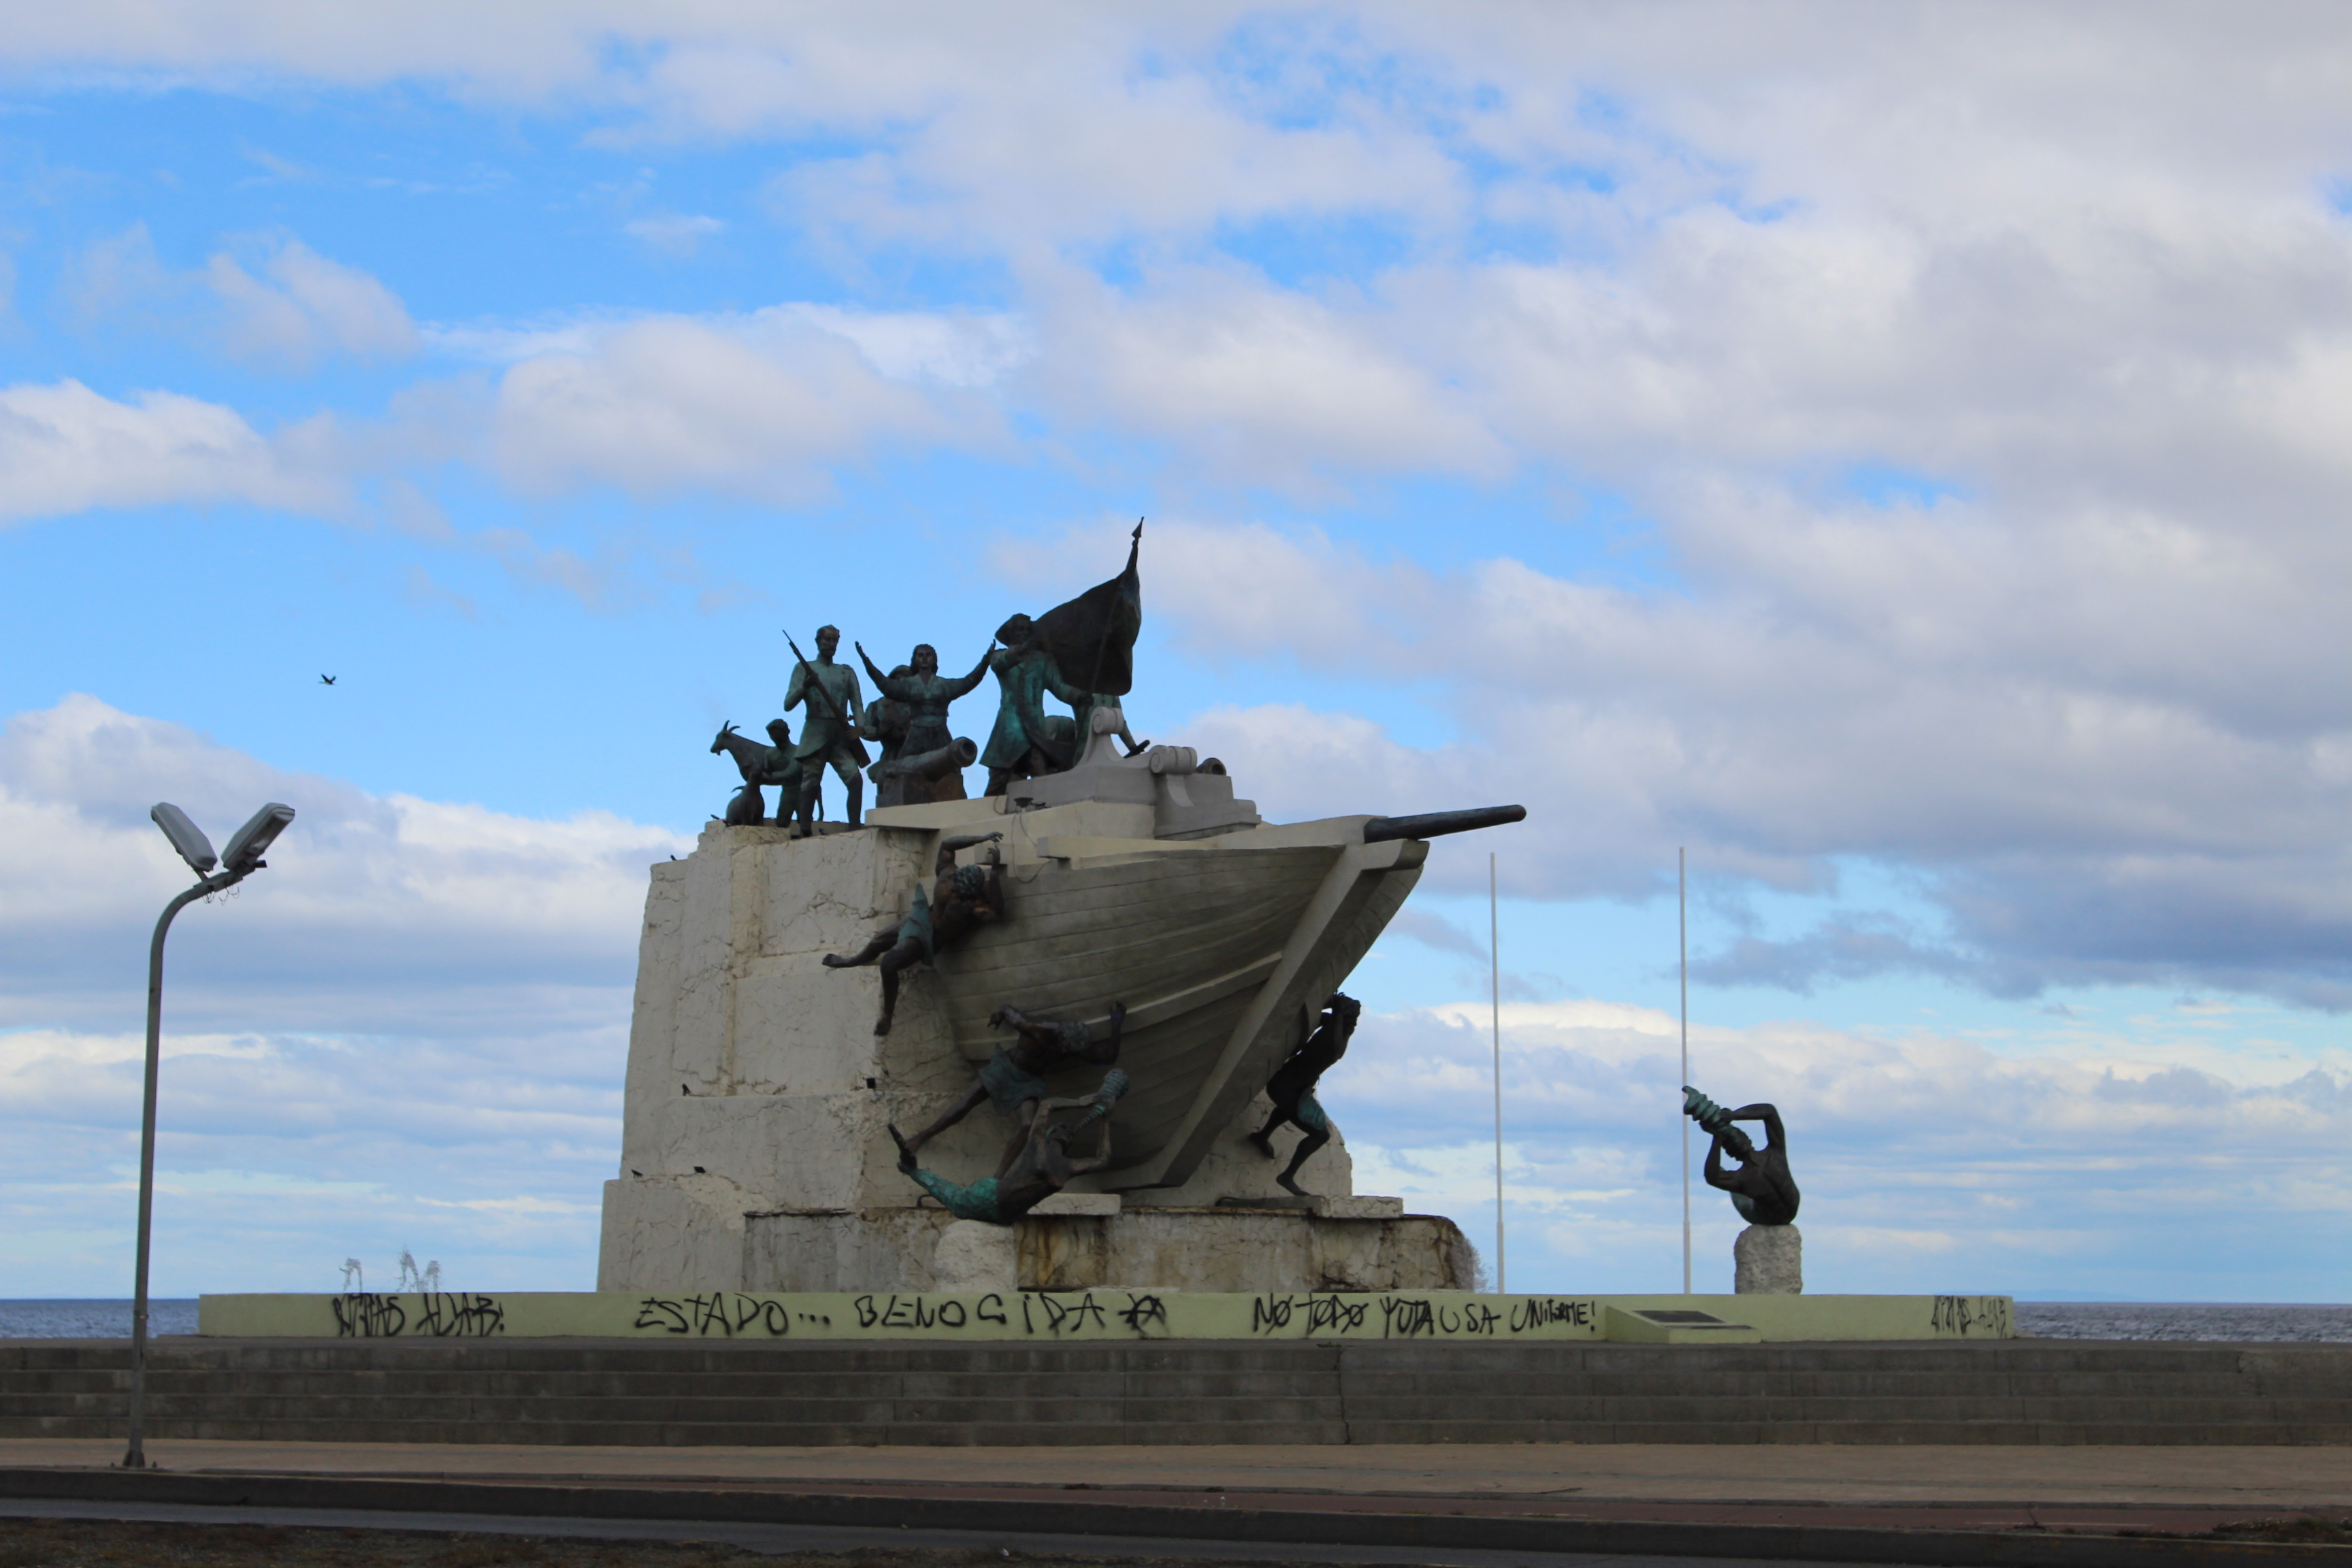 Views from the pier in Punta Arenas, Chile, Feb. 28, 2020